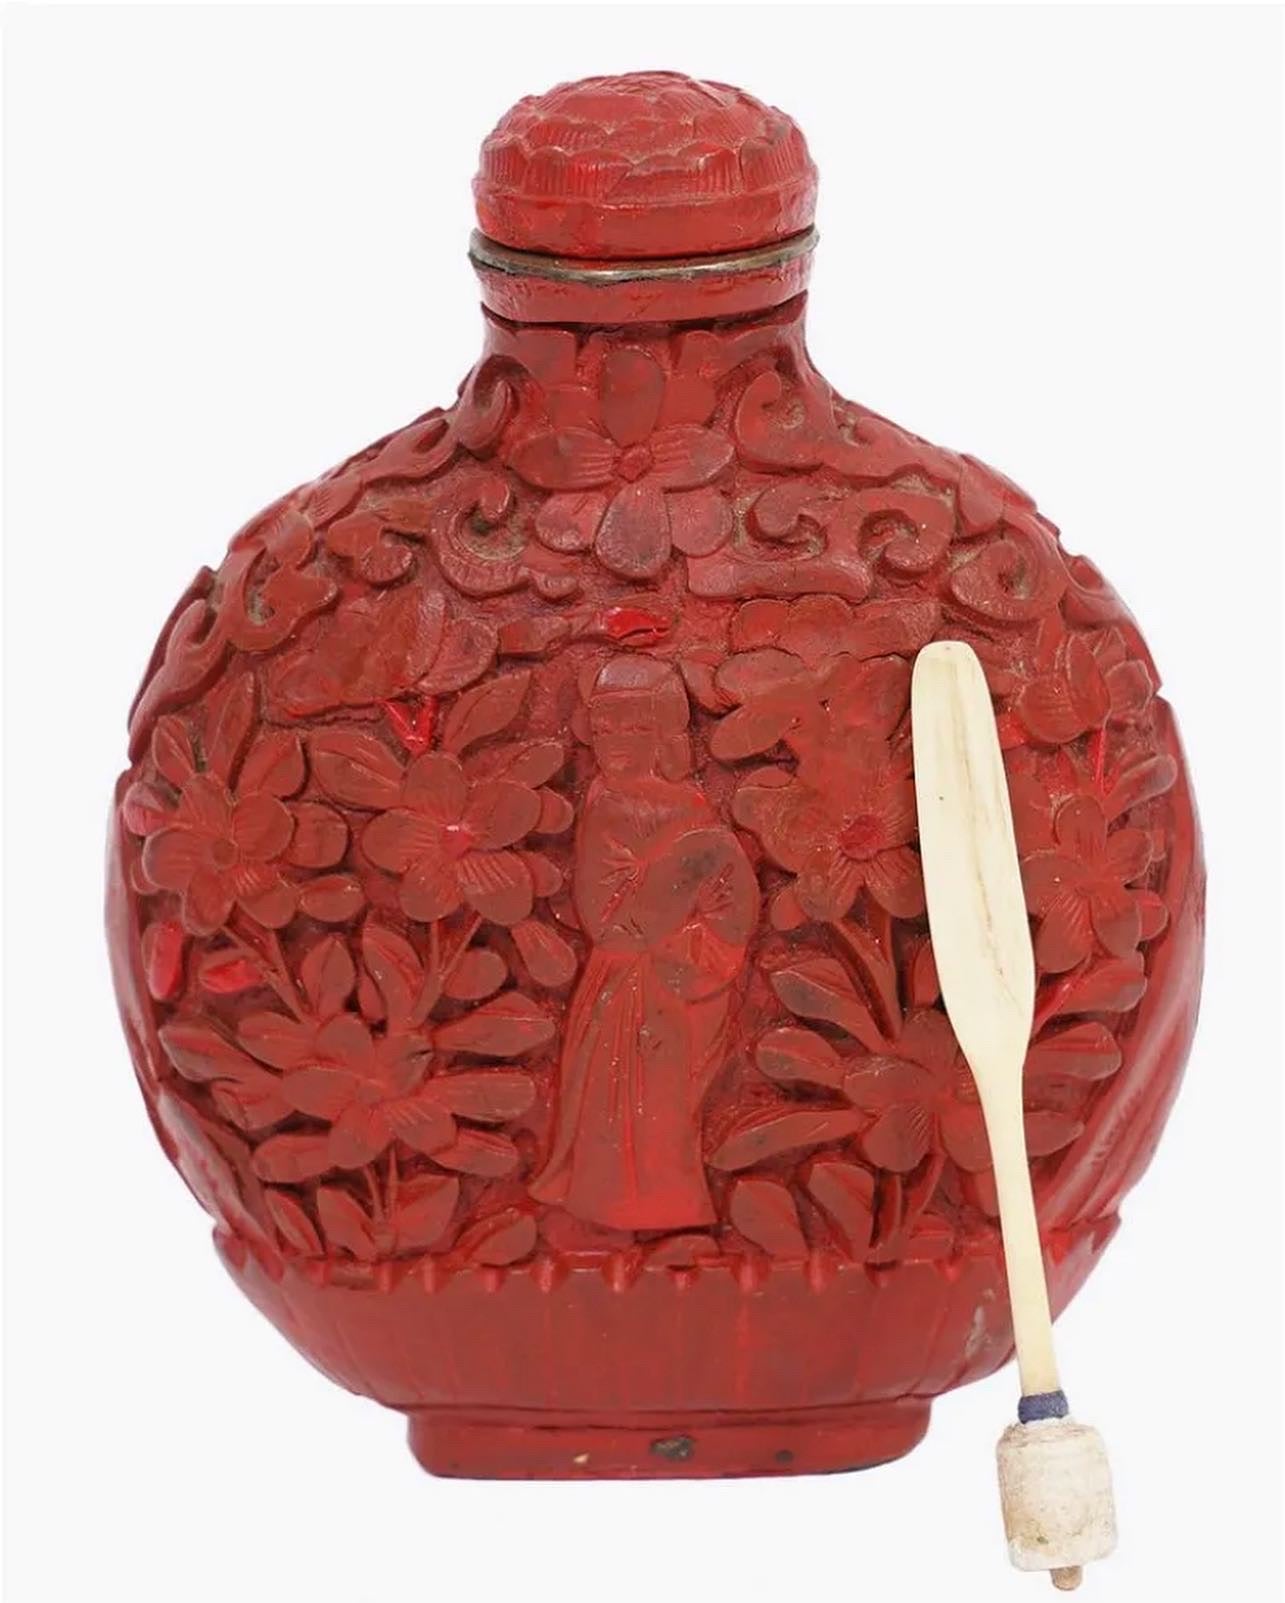 Chinese antique red Cinnabar lacquer snuff bottle, late 19th C. Carved with imperial figures and flowers